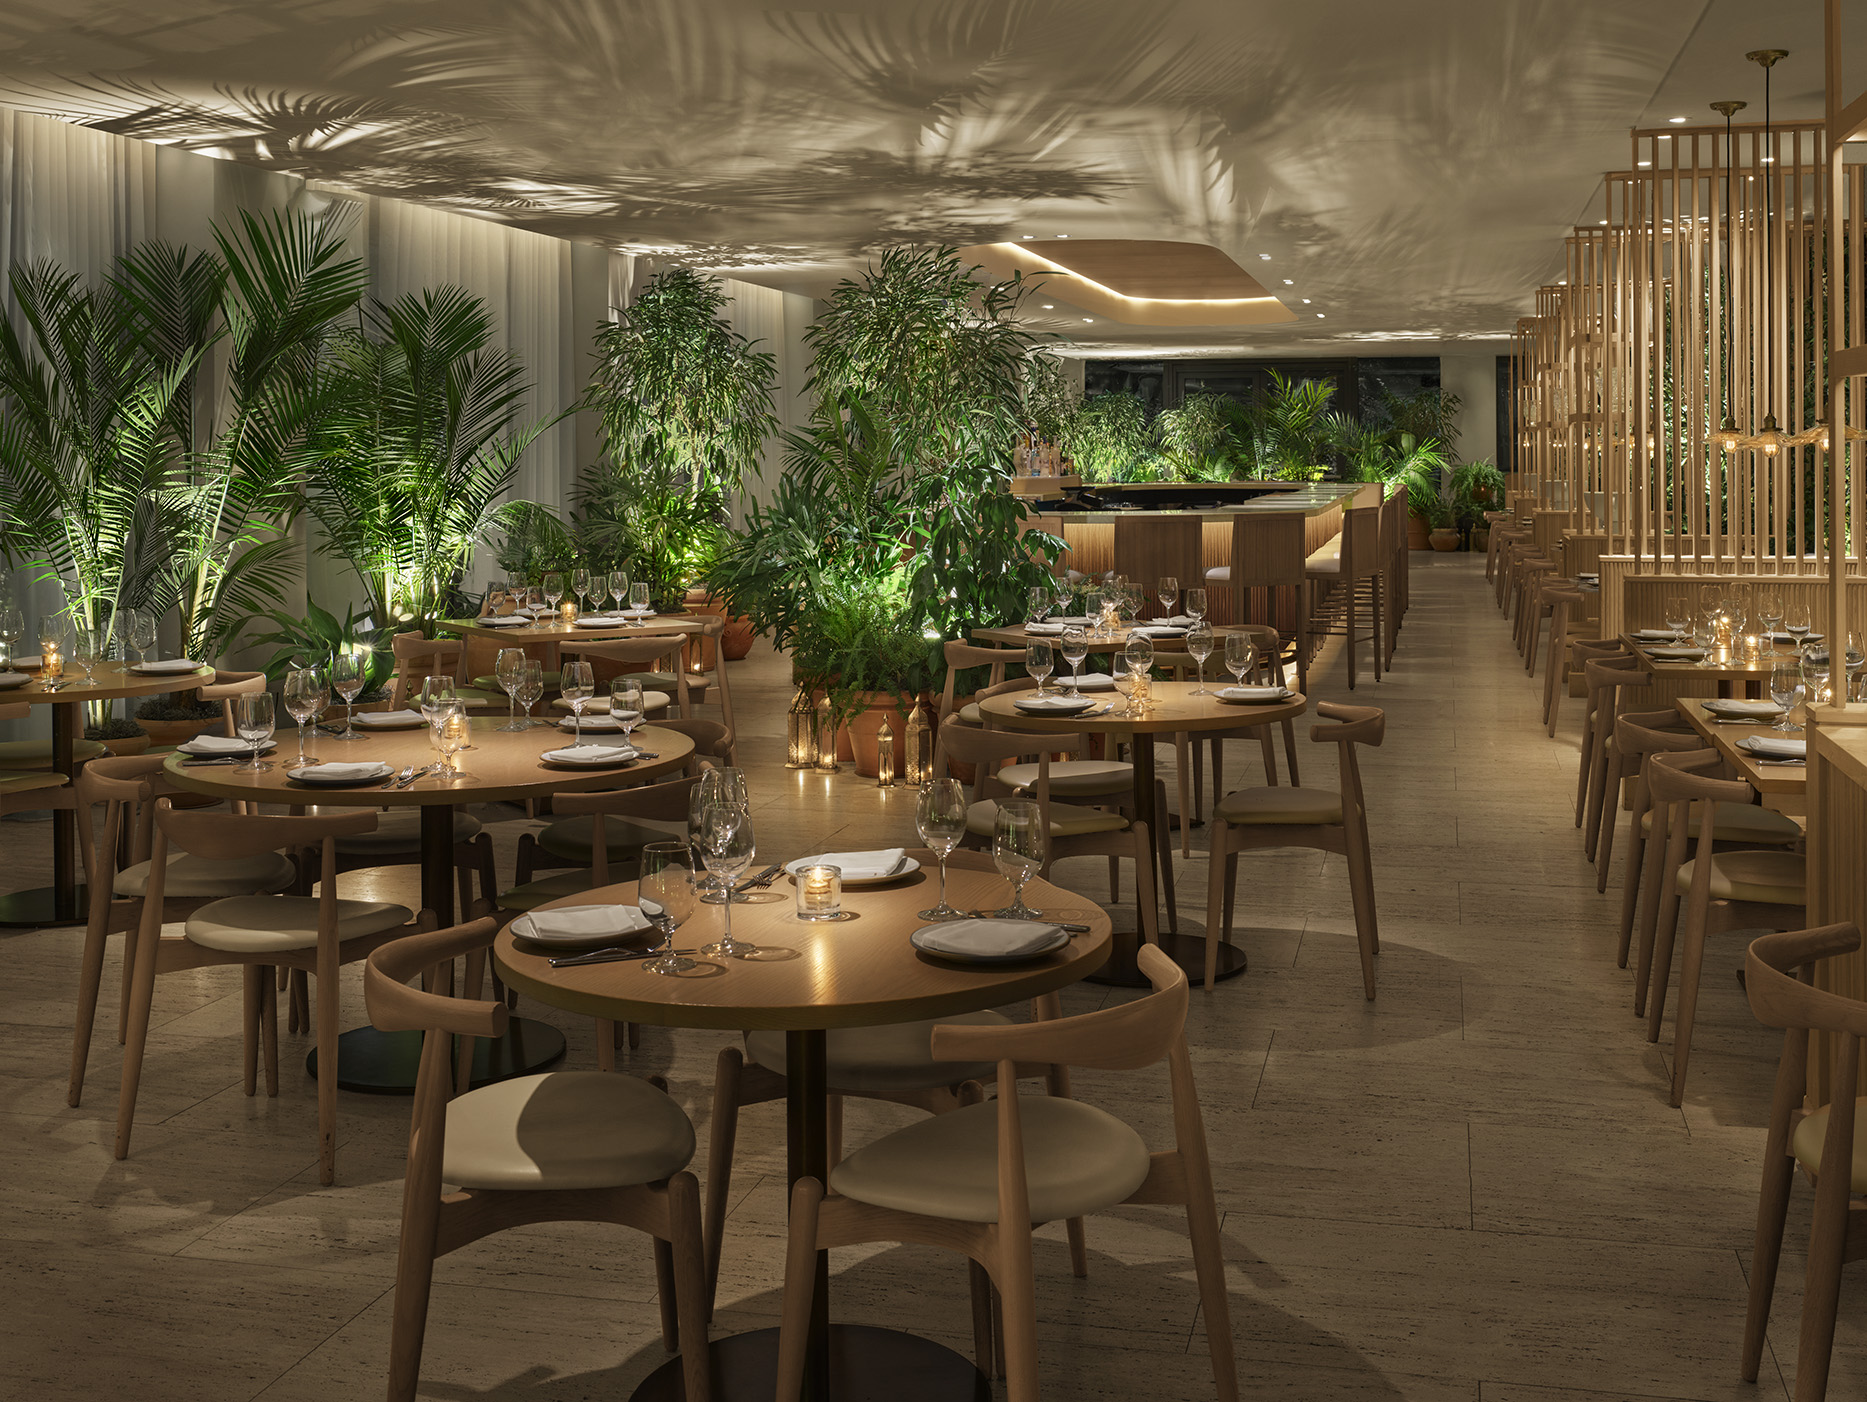 Restaurant designed with light wood and tropical flora